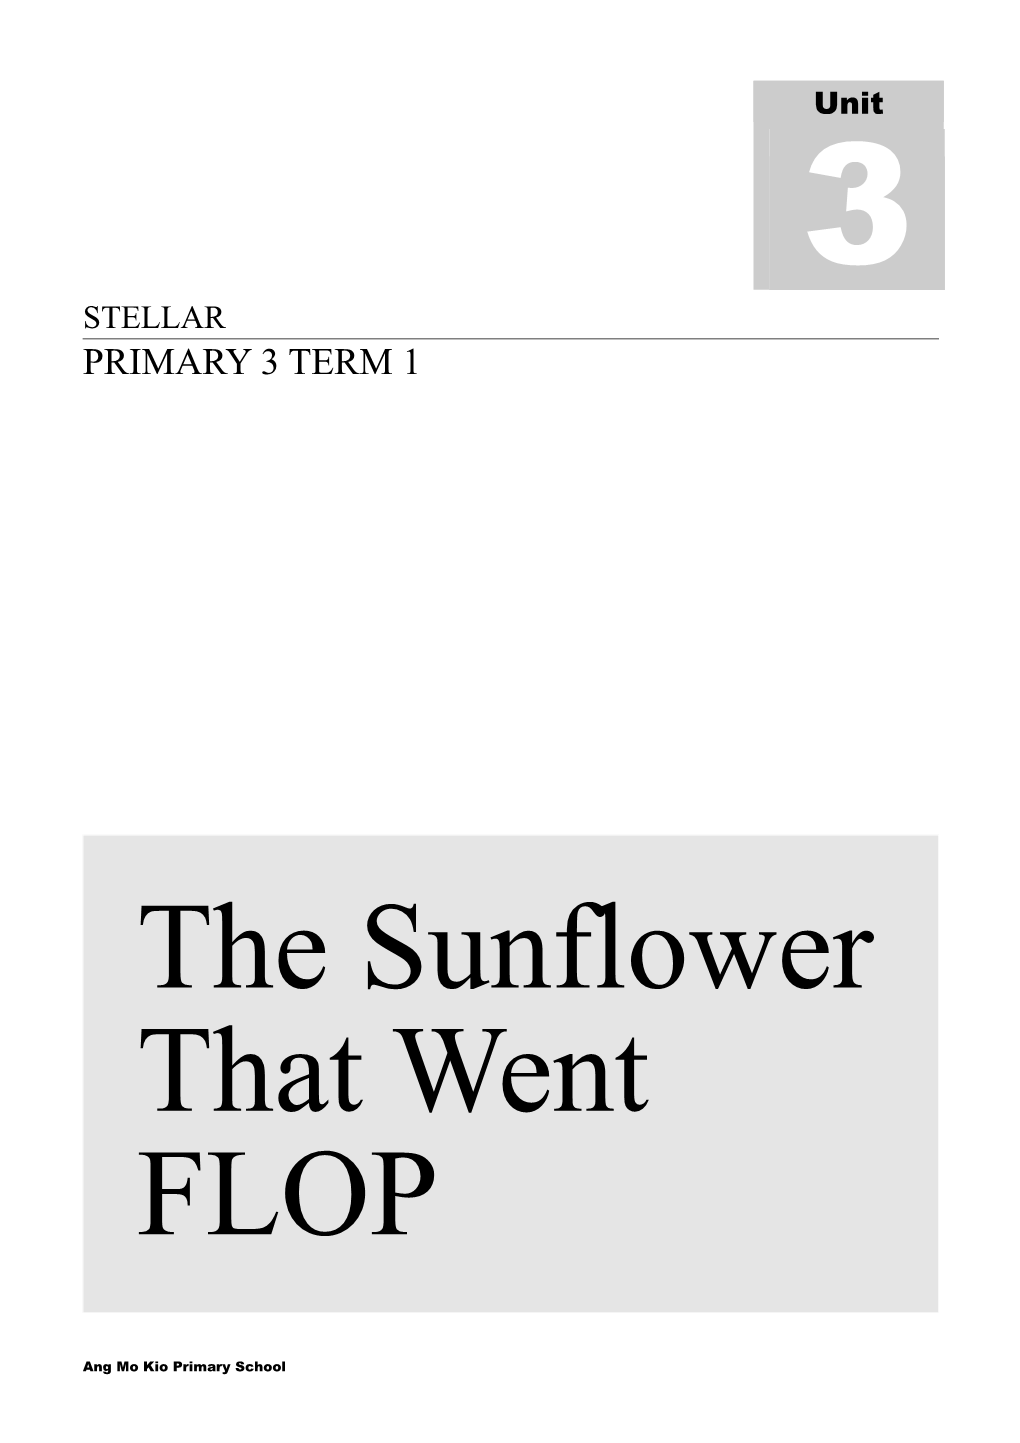 Primary 3 Unit 3 the Sunflower That Went Flop